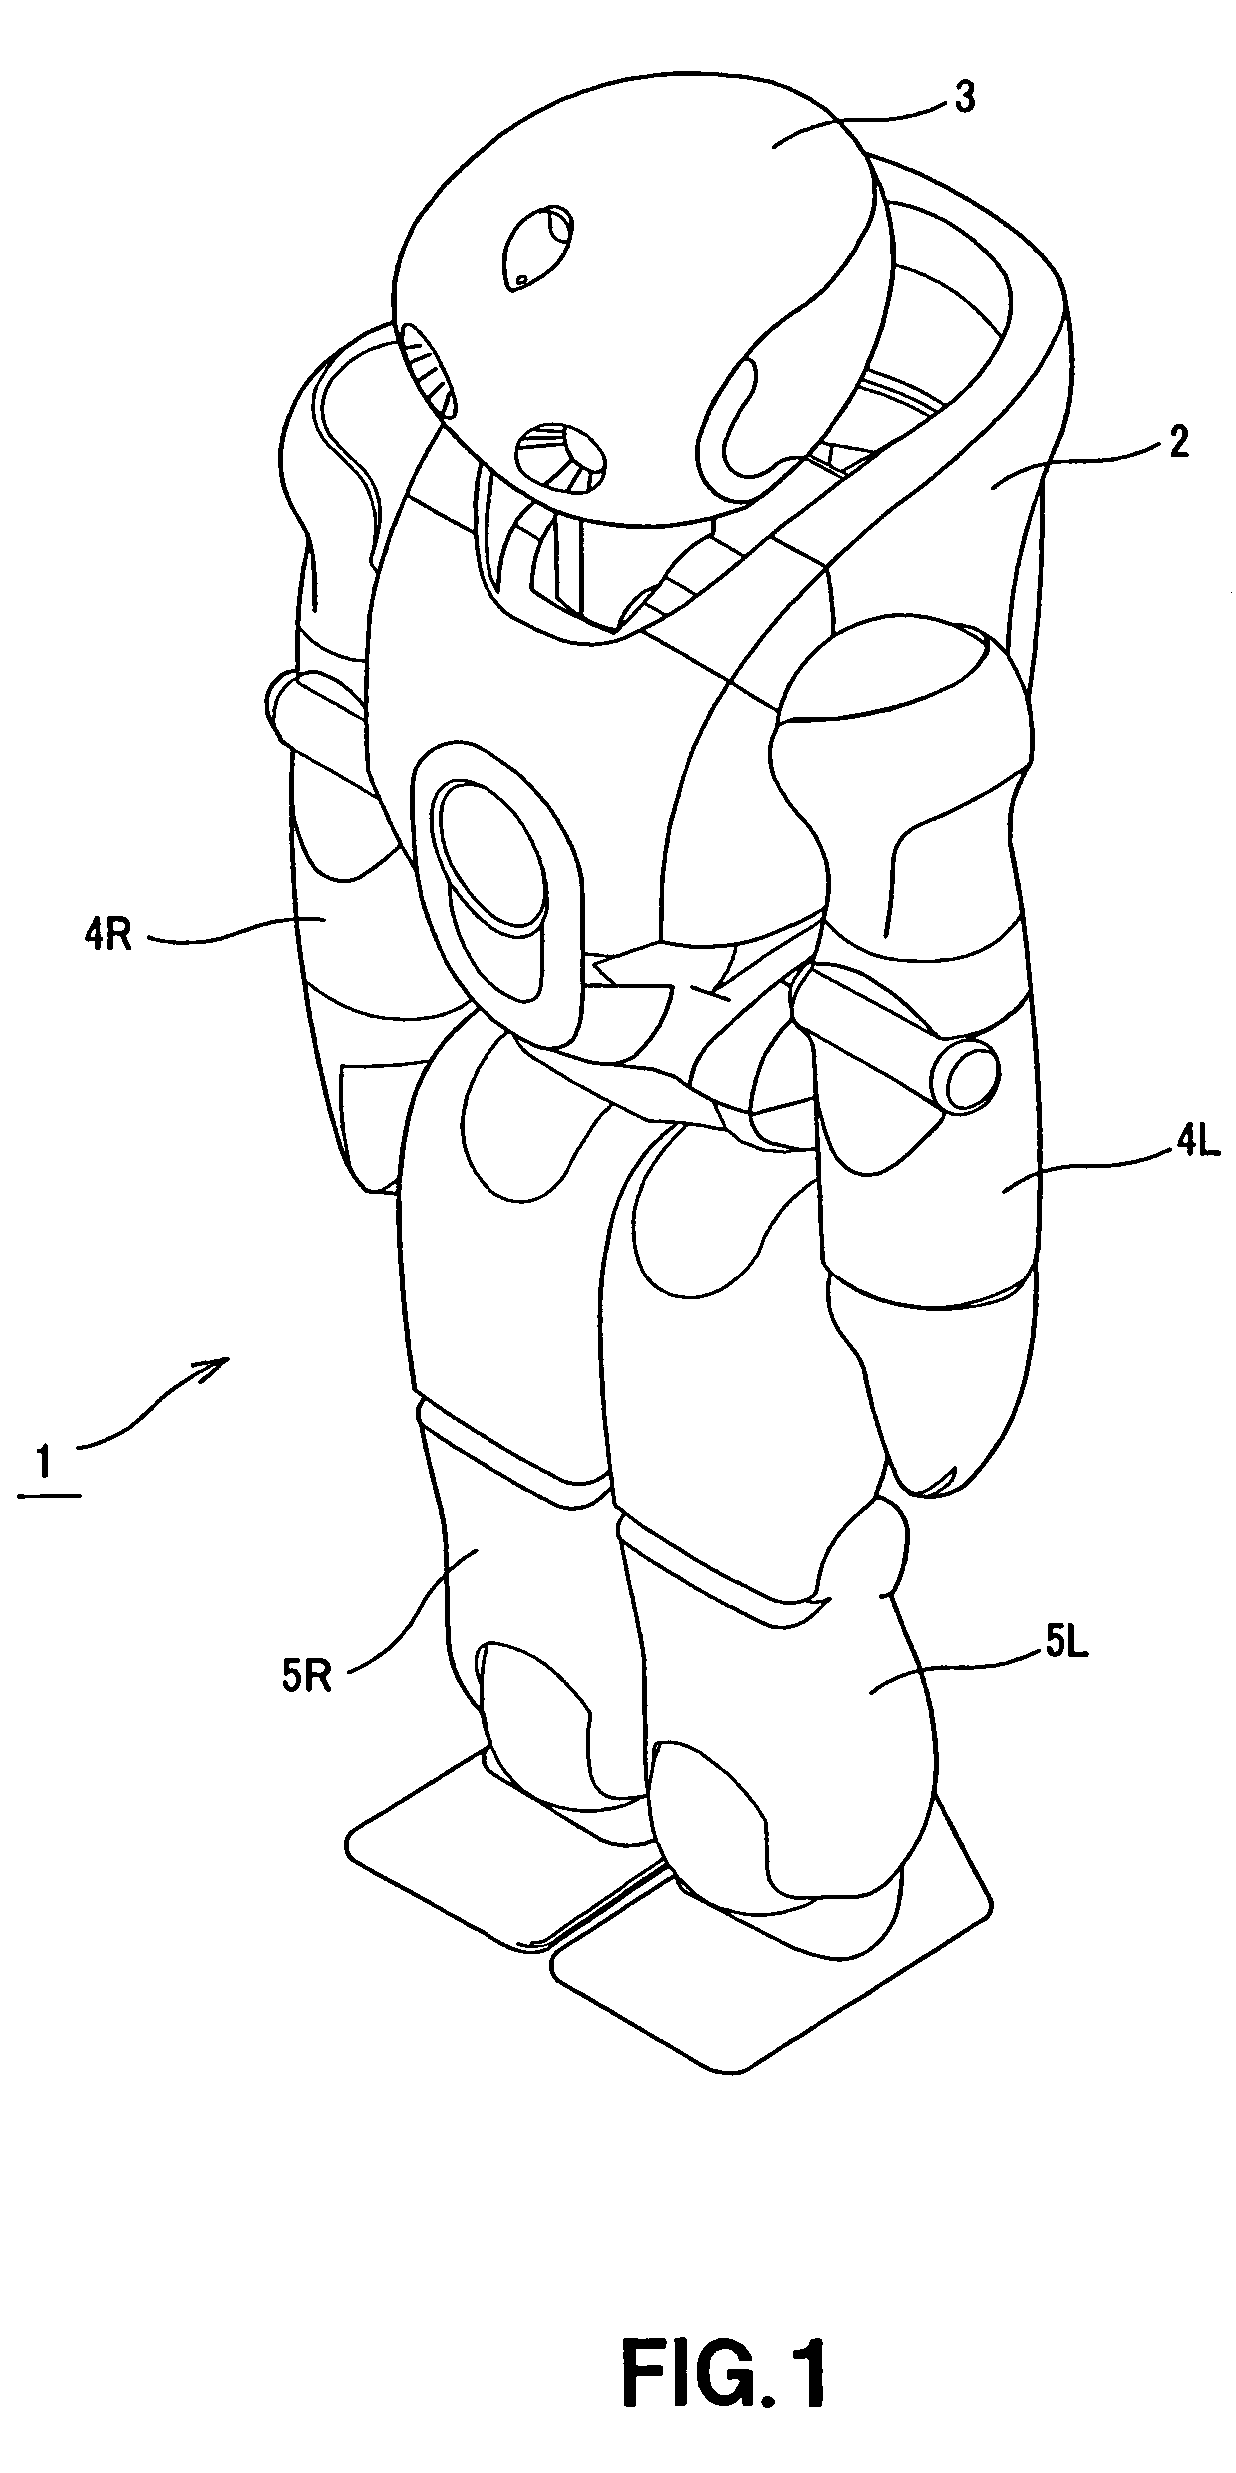 Robot and control method for controlling robot expressions